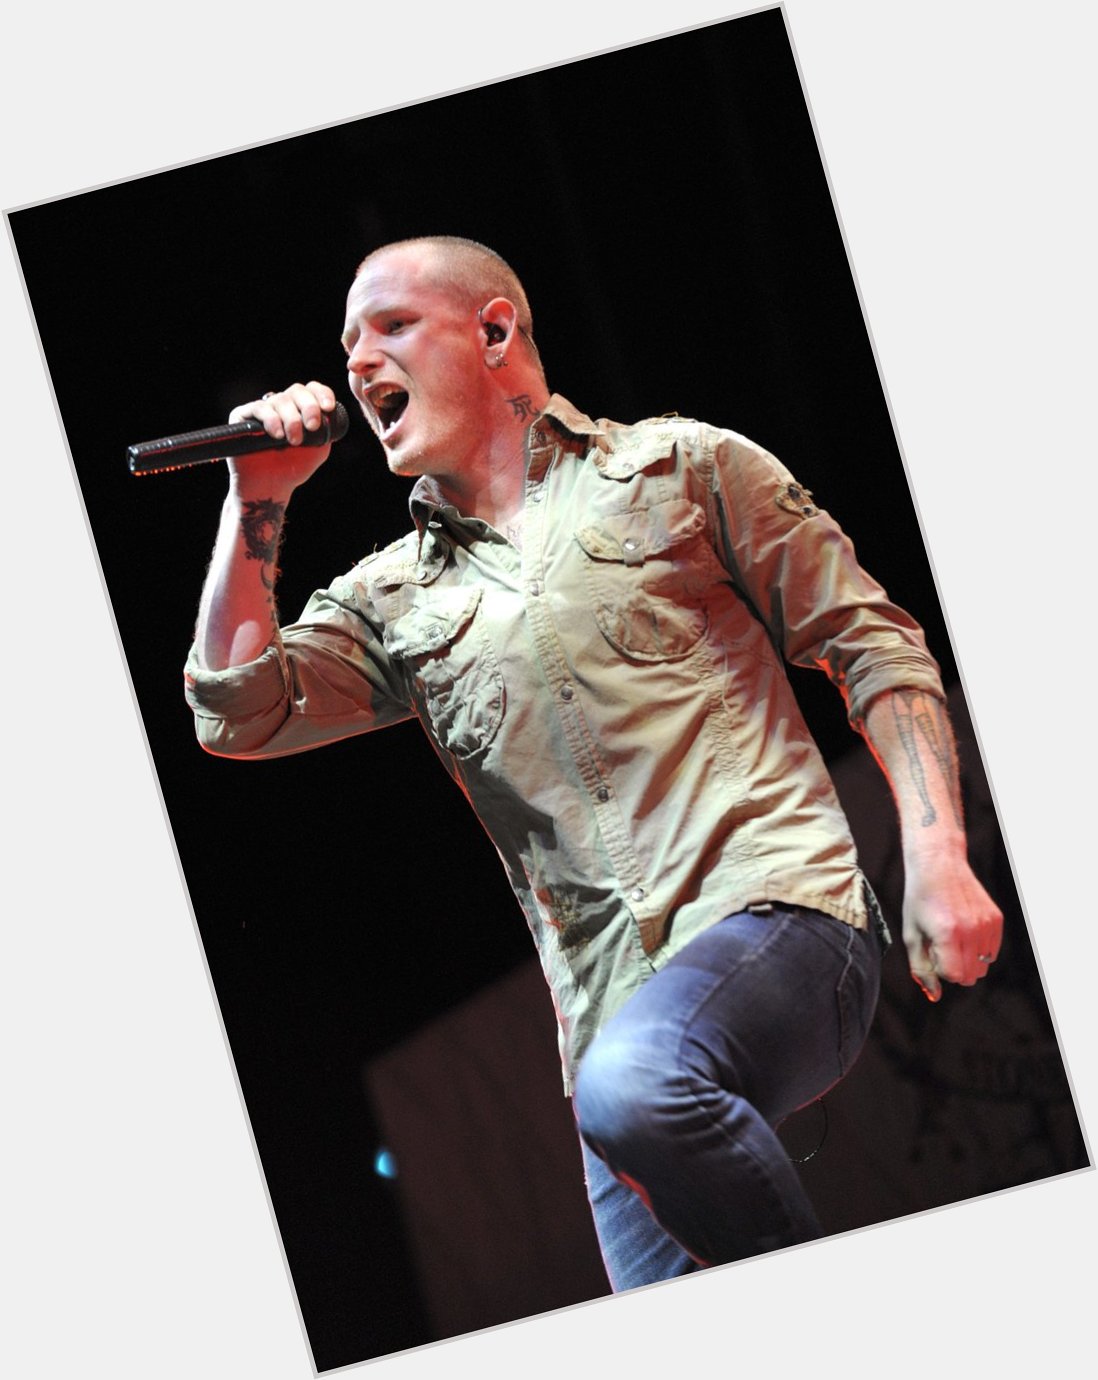 Congrats to on another Grammy nomination...and happy birthday Corey Taylor 